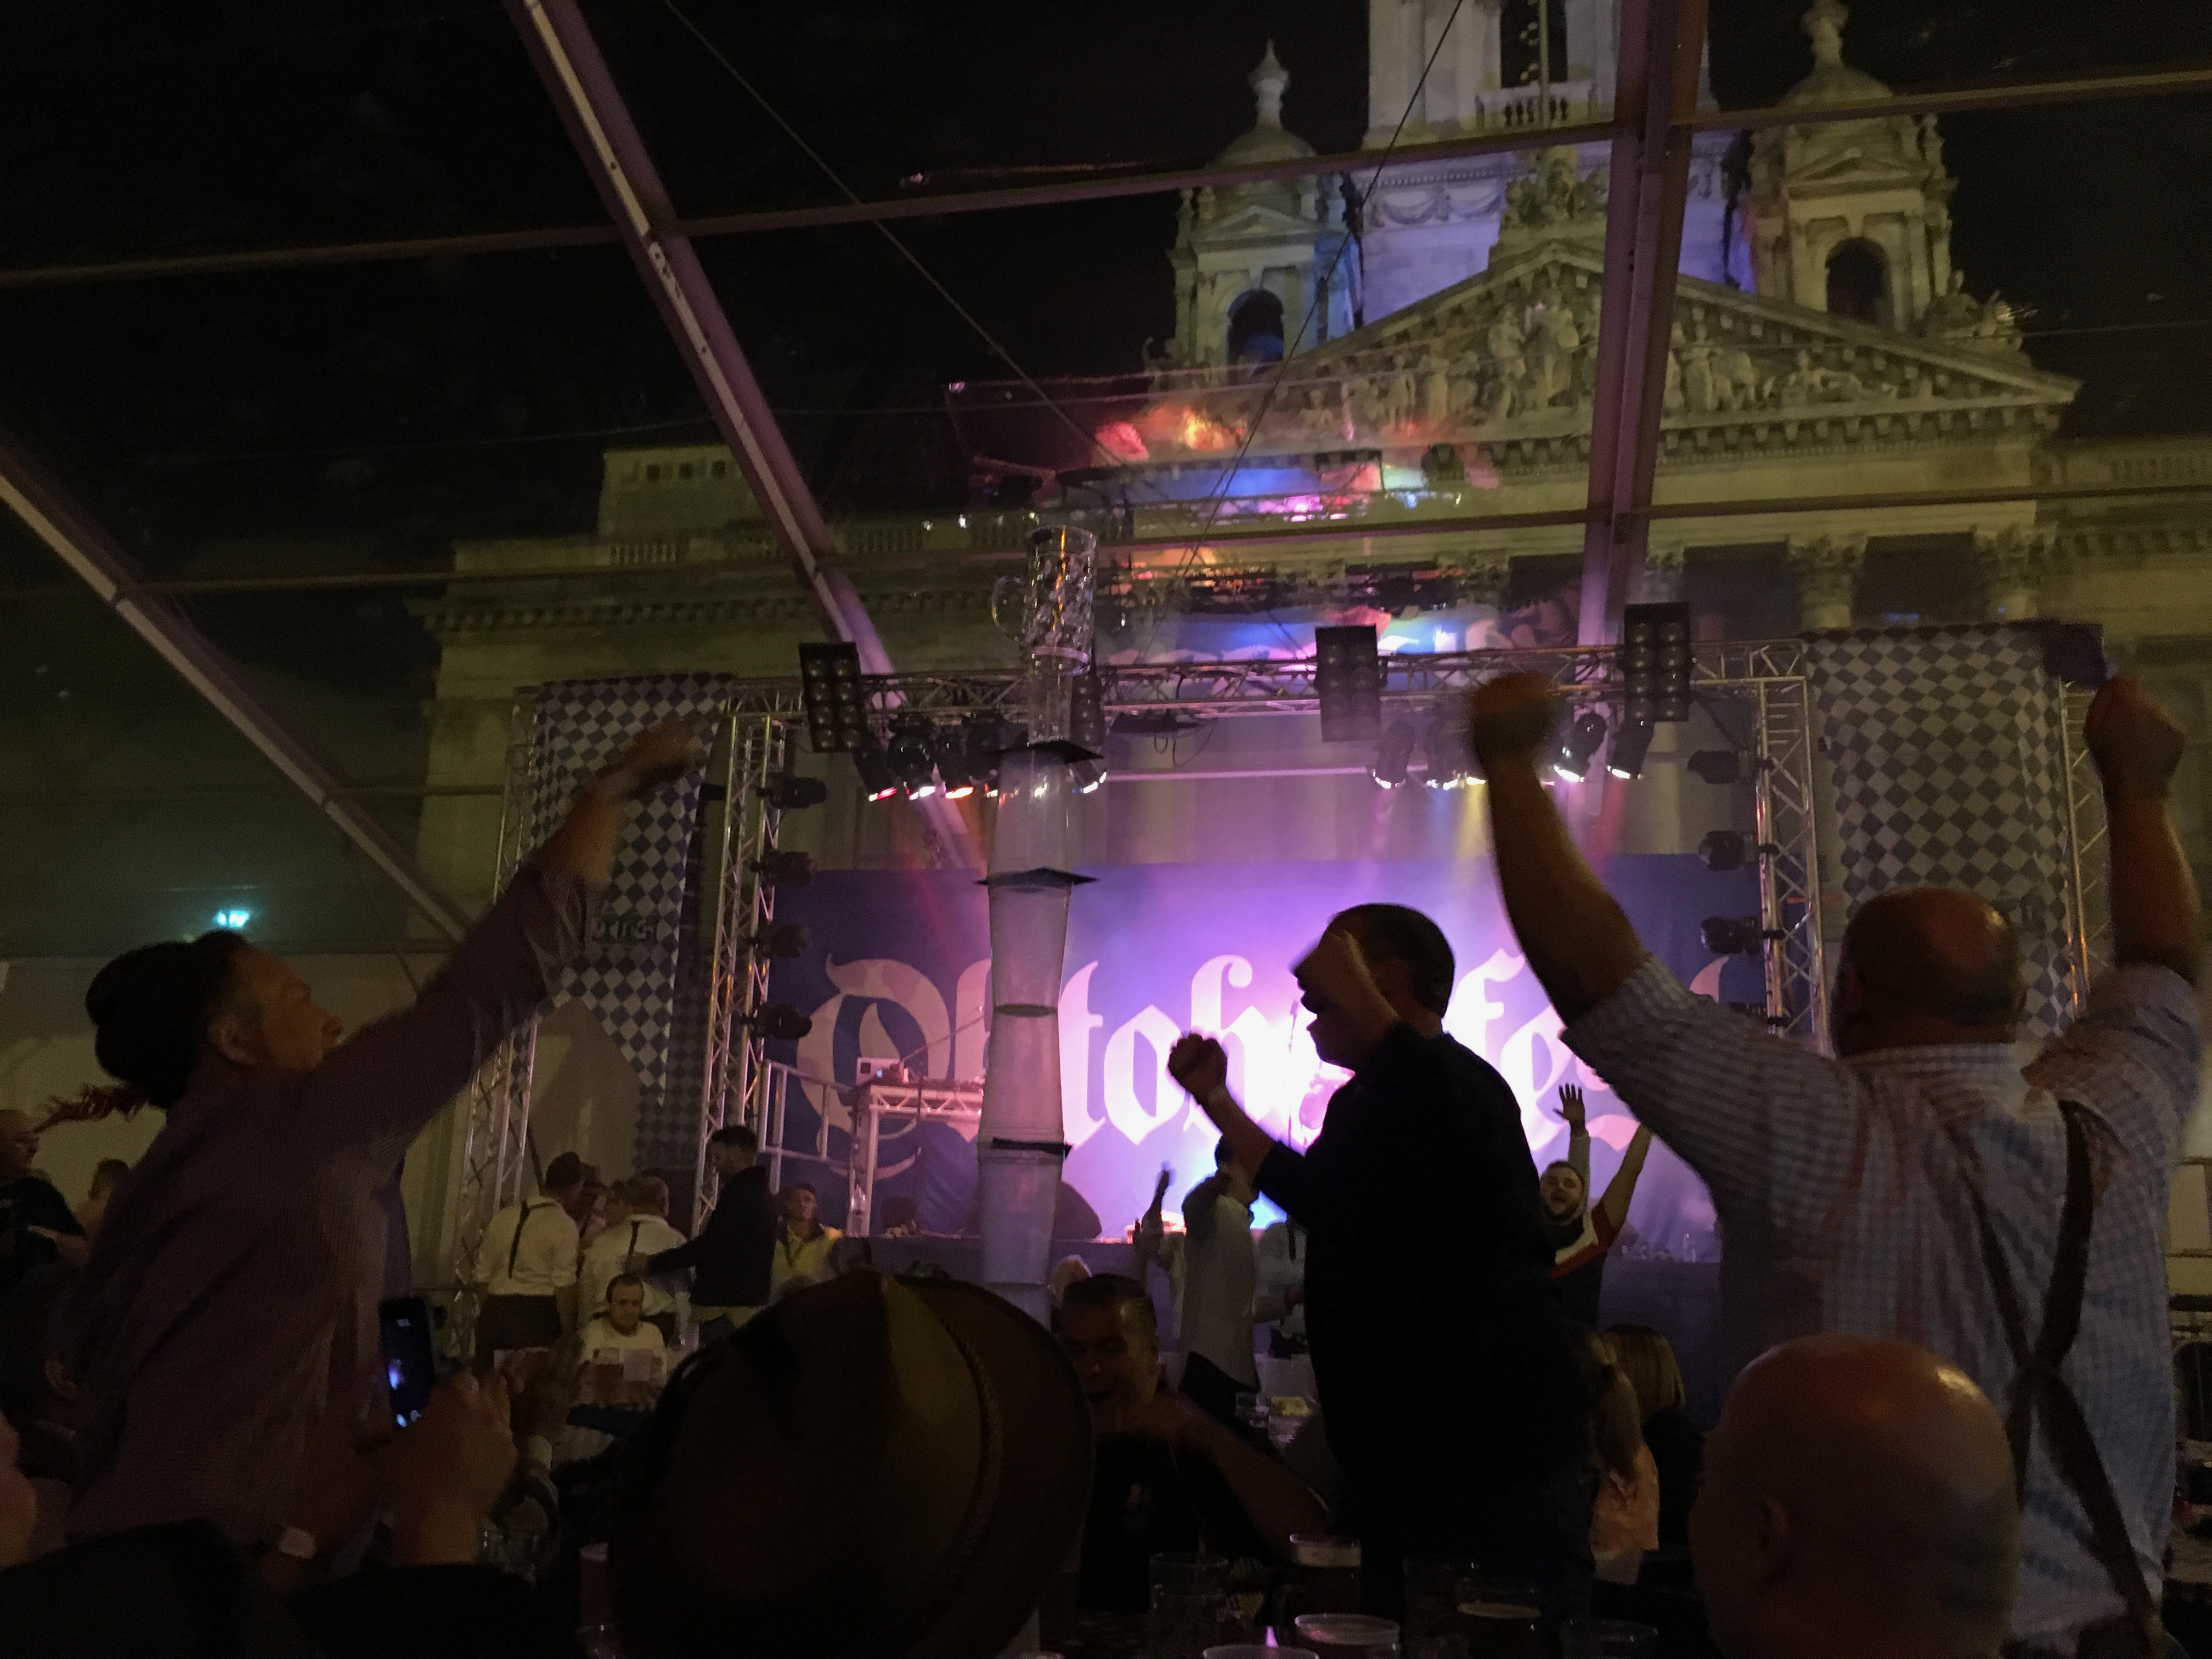 A table with many glasses stacked higher than the people standing around, likely over 7 feet tall. The person on the left is pointing to it and the people on the right is celebrating with their arms raised. In the background is the stage with lighting and a blue and white Oktoberfest background